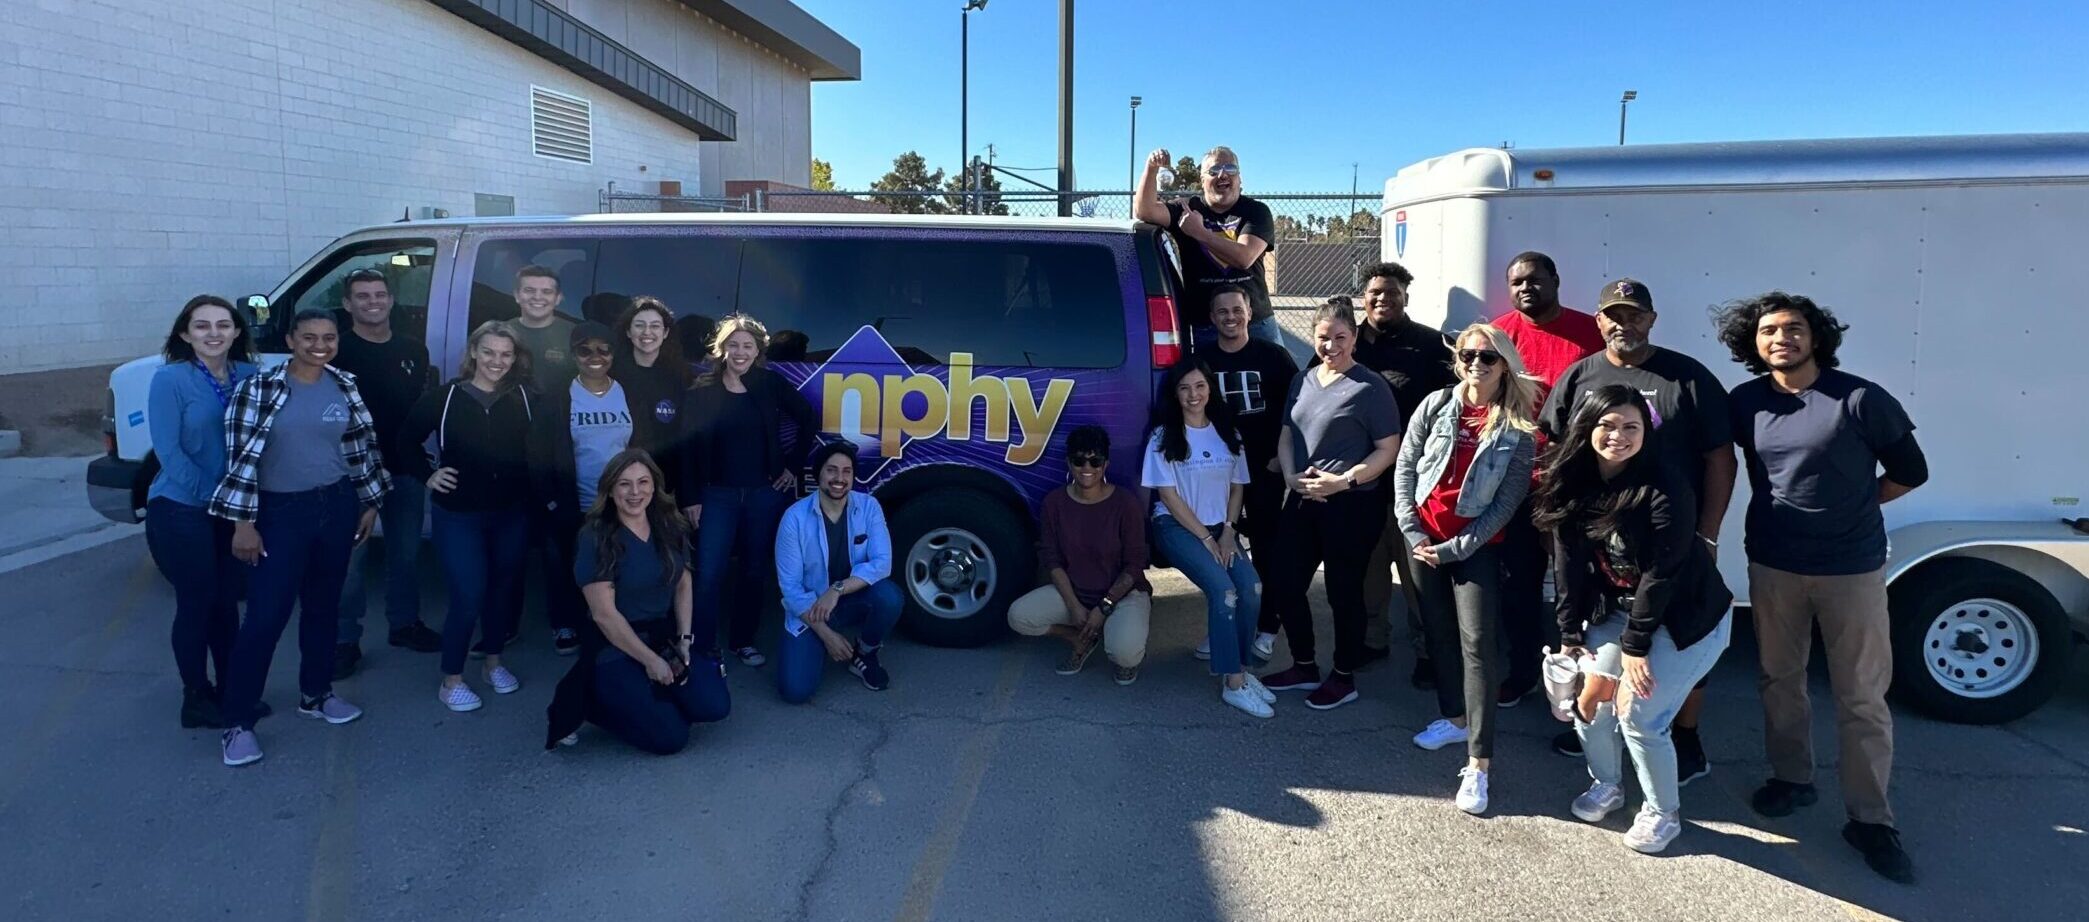 Fellows gather for a photo in front of an NPHY van after participating in Feel Good Friday at the organization